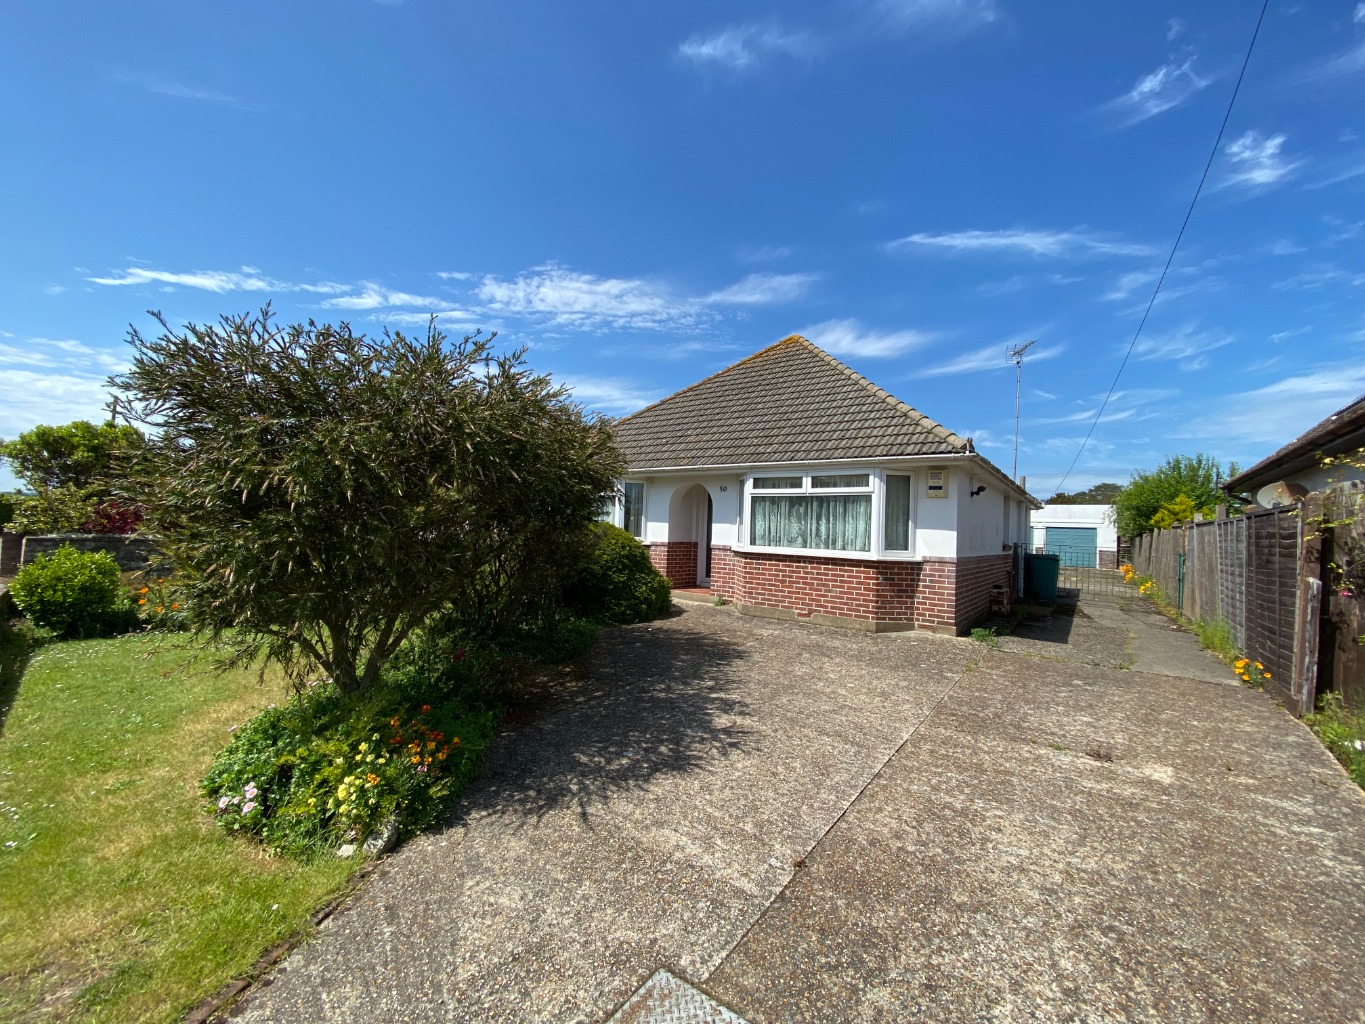 2 bed detached bungalow for sale in Lake Drive, Poole - Property Image 1